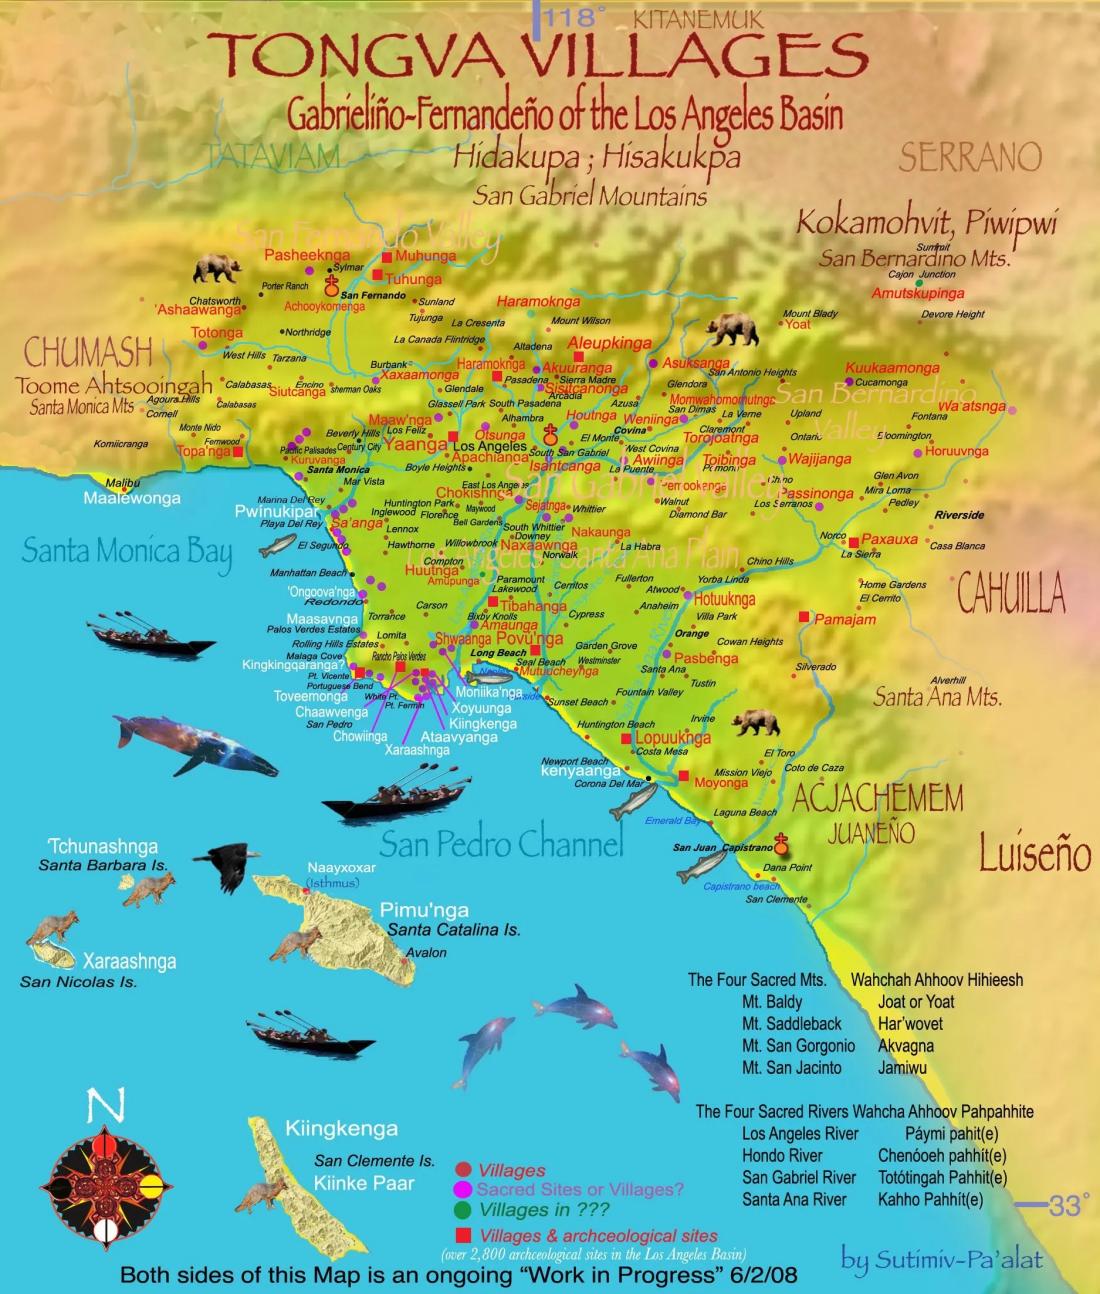 Map of Tongva villages in the Los Angeles region created by Sutimiv Pa'alat